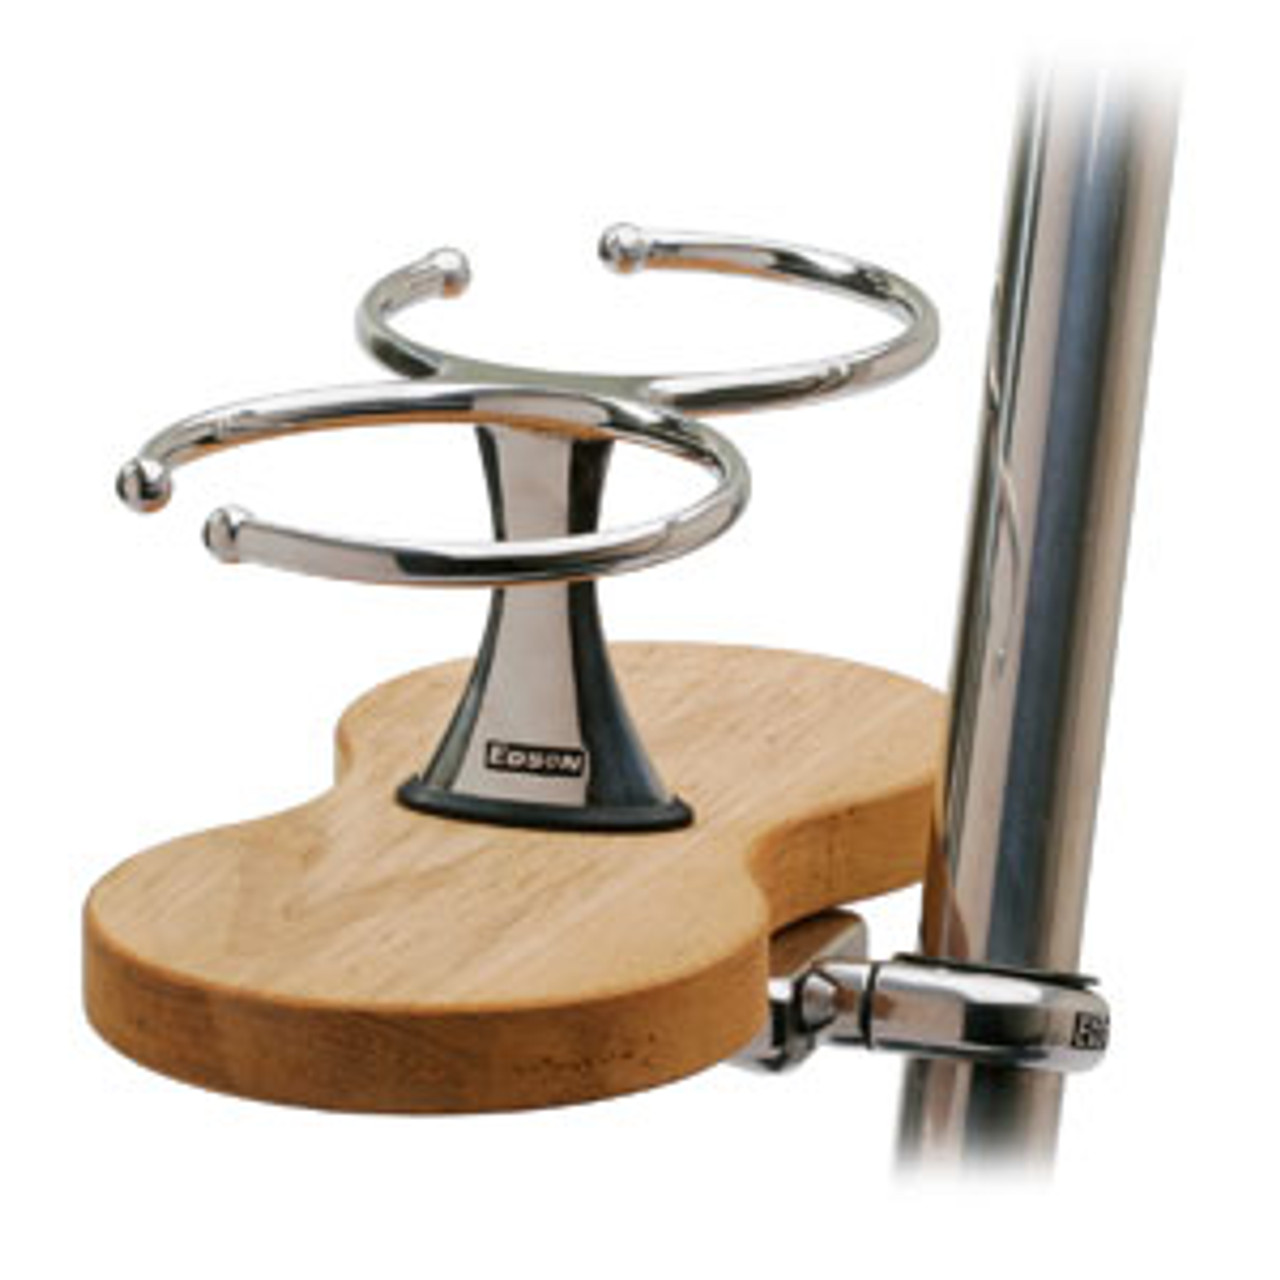 Boat Drink Holders YT-1 & YT-2  Marine, Boating And Fishing